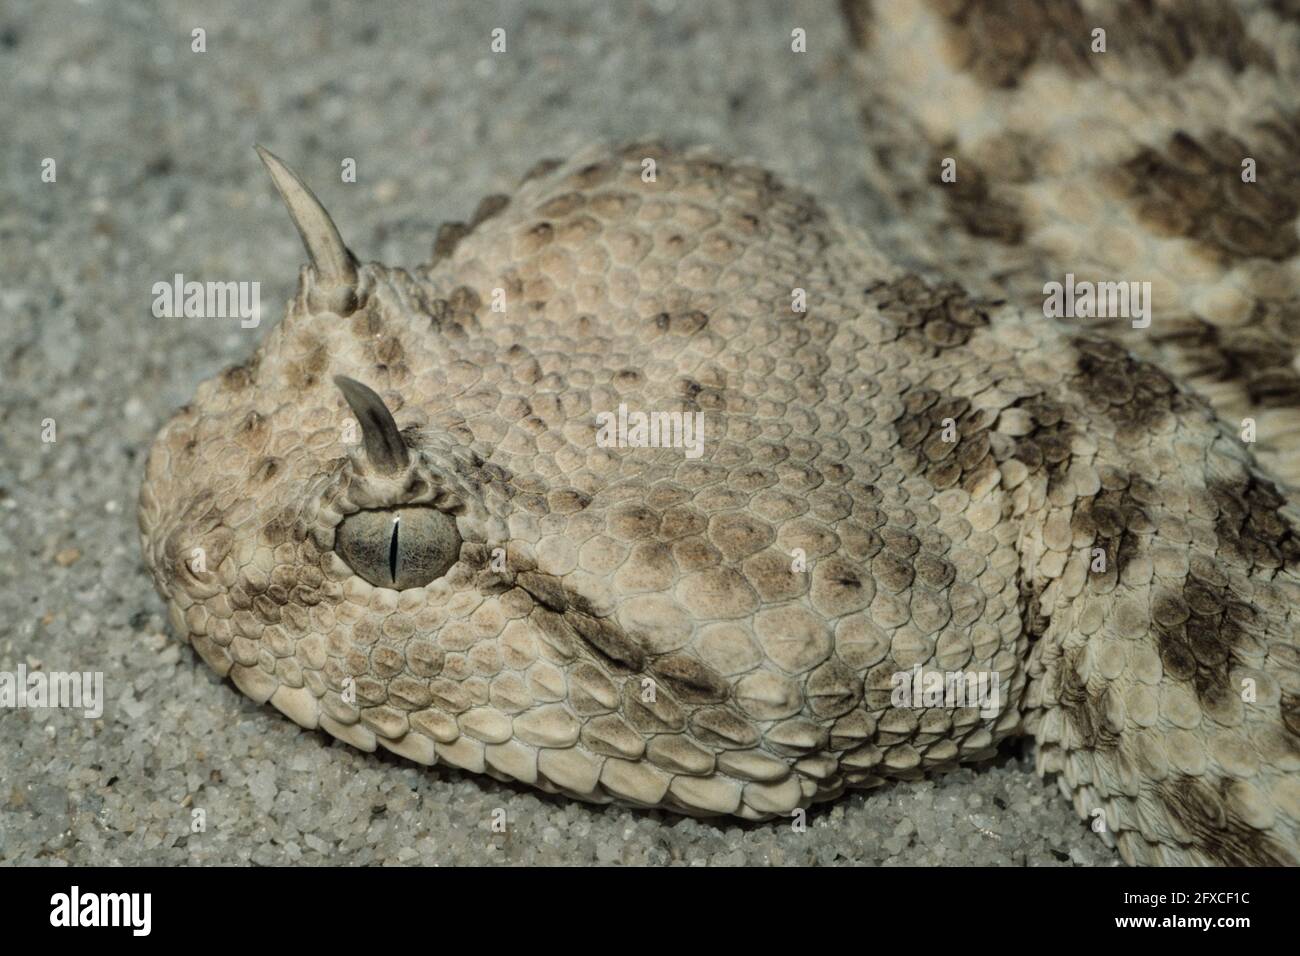 Saharan Horned Viper or Horned Desert Viper, Cerastes cerastes, is native to the deserts of North Africa and Arabian Peninsula.  London Zoo. Stock Photo